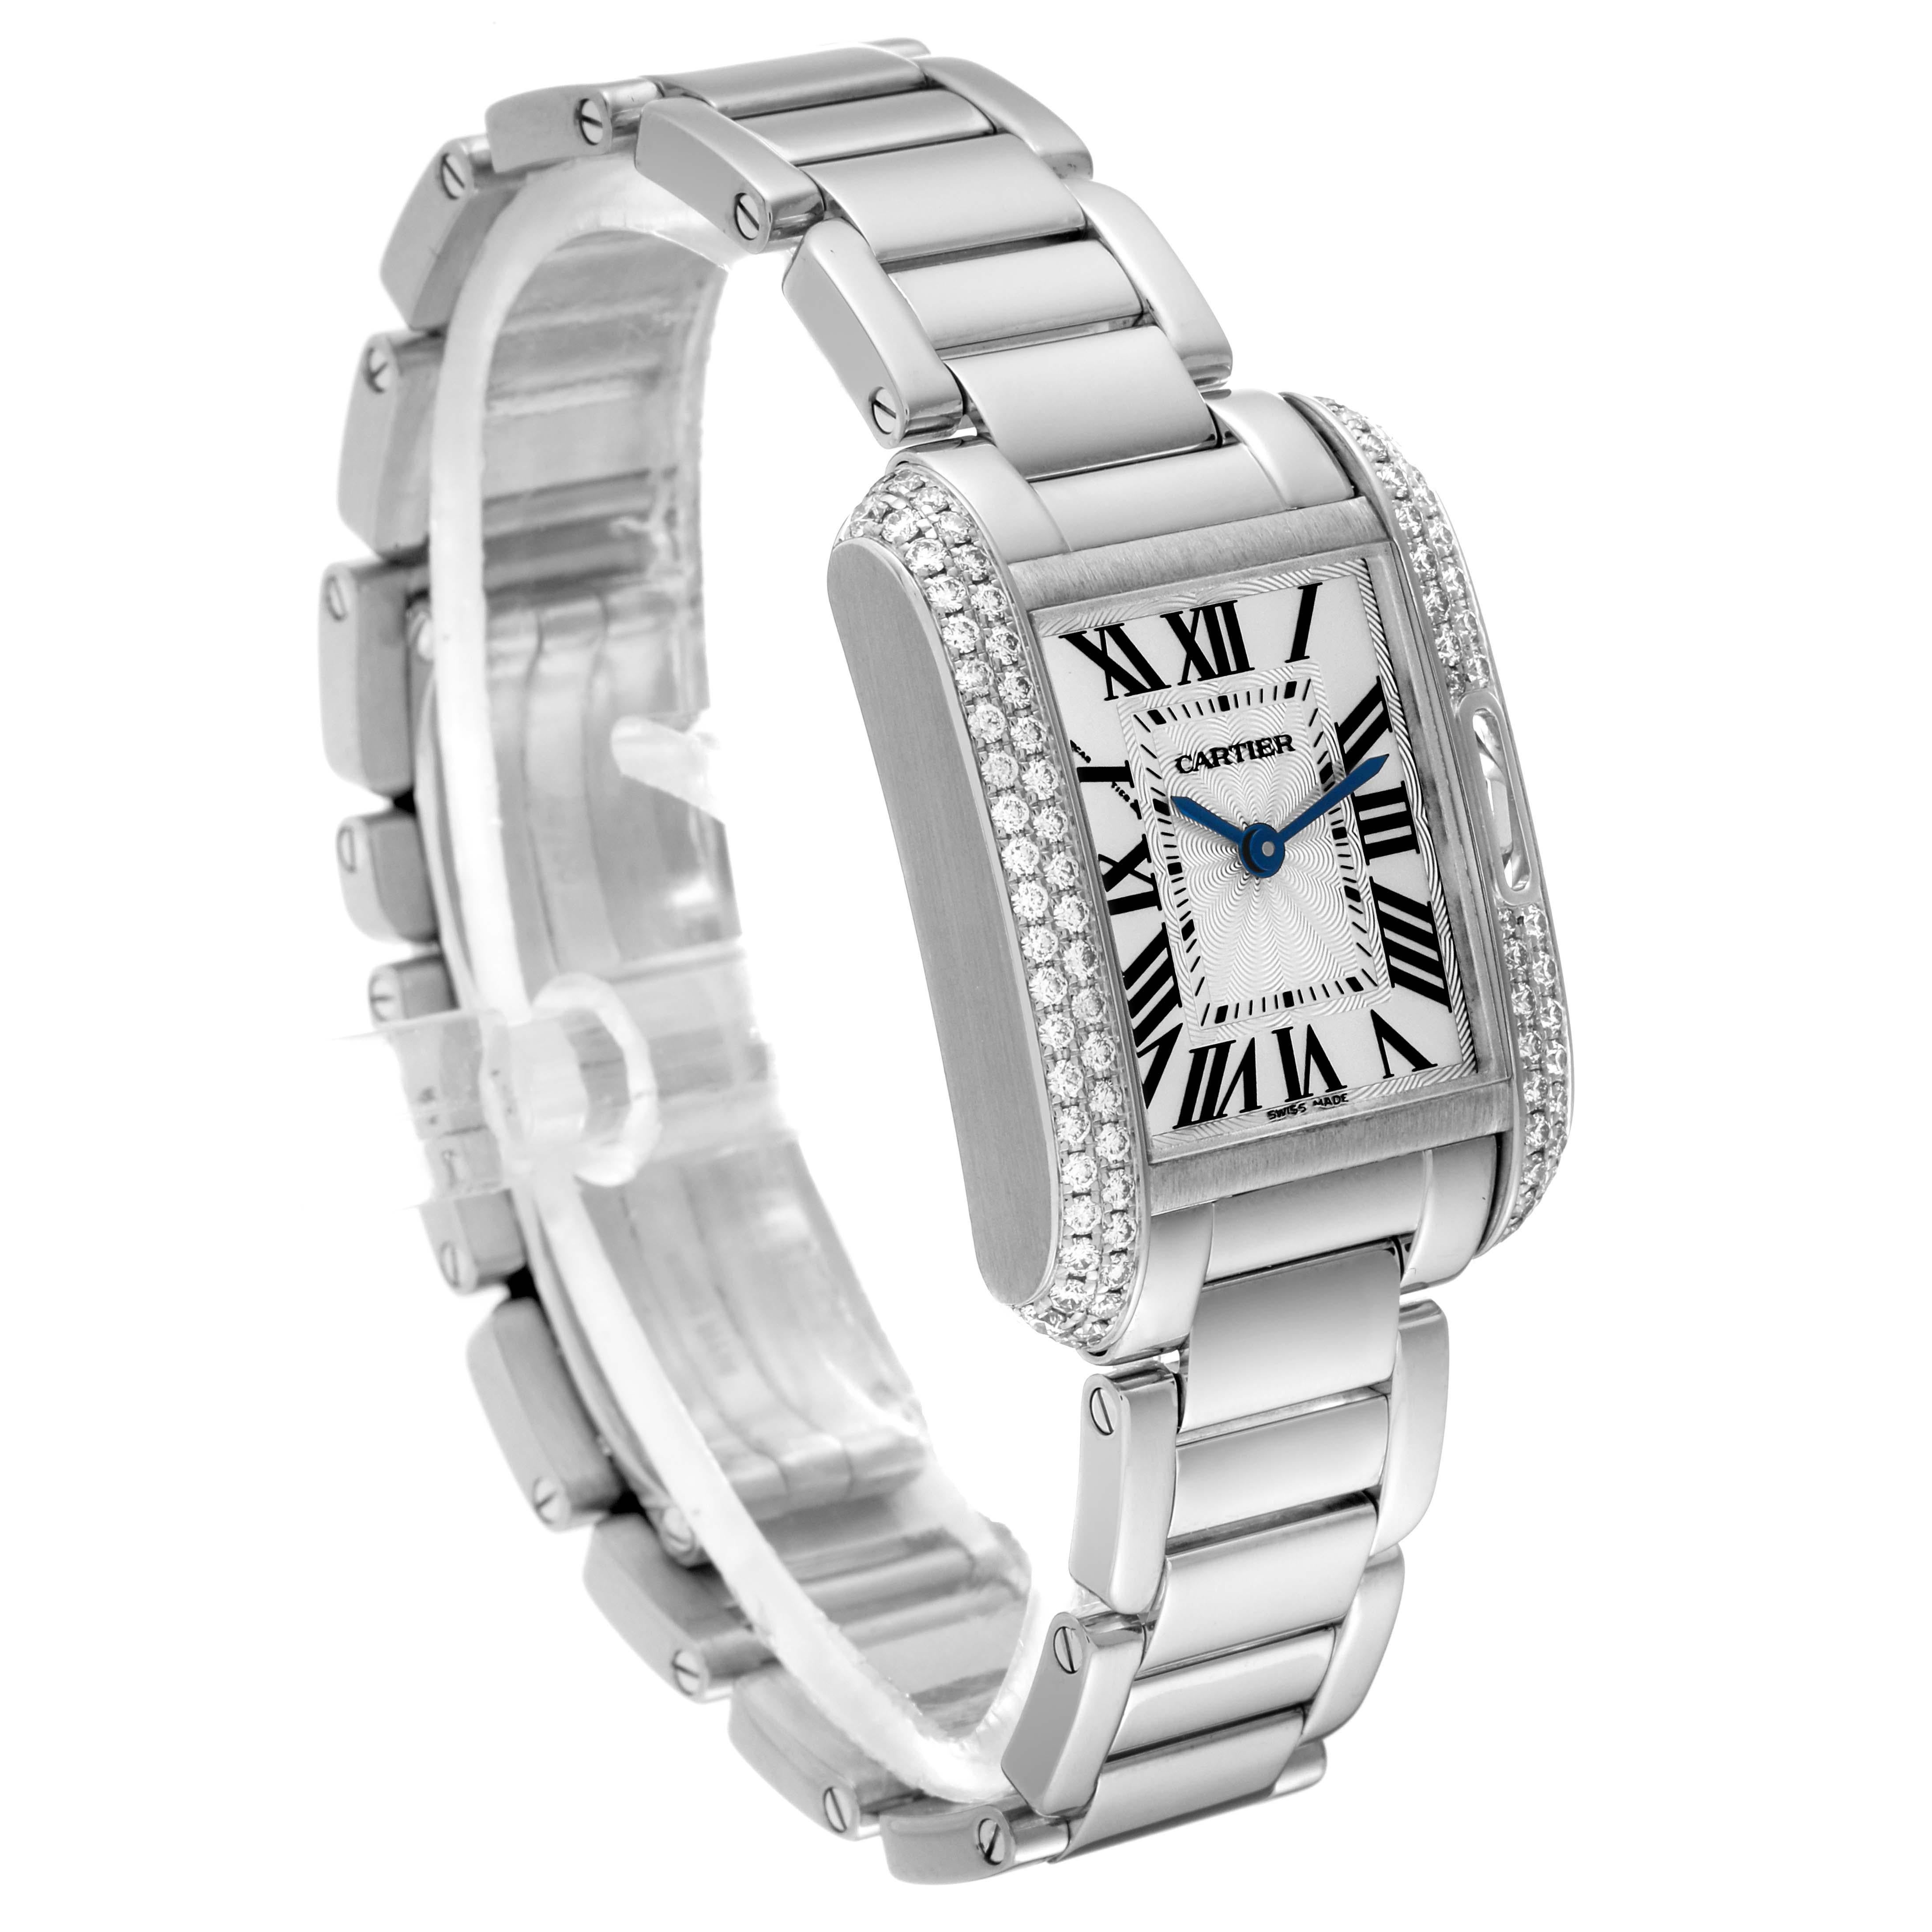 Cartier Tank Anglaise White Gold Diamond Ladies Watch WT100008 For Sale 5